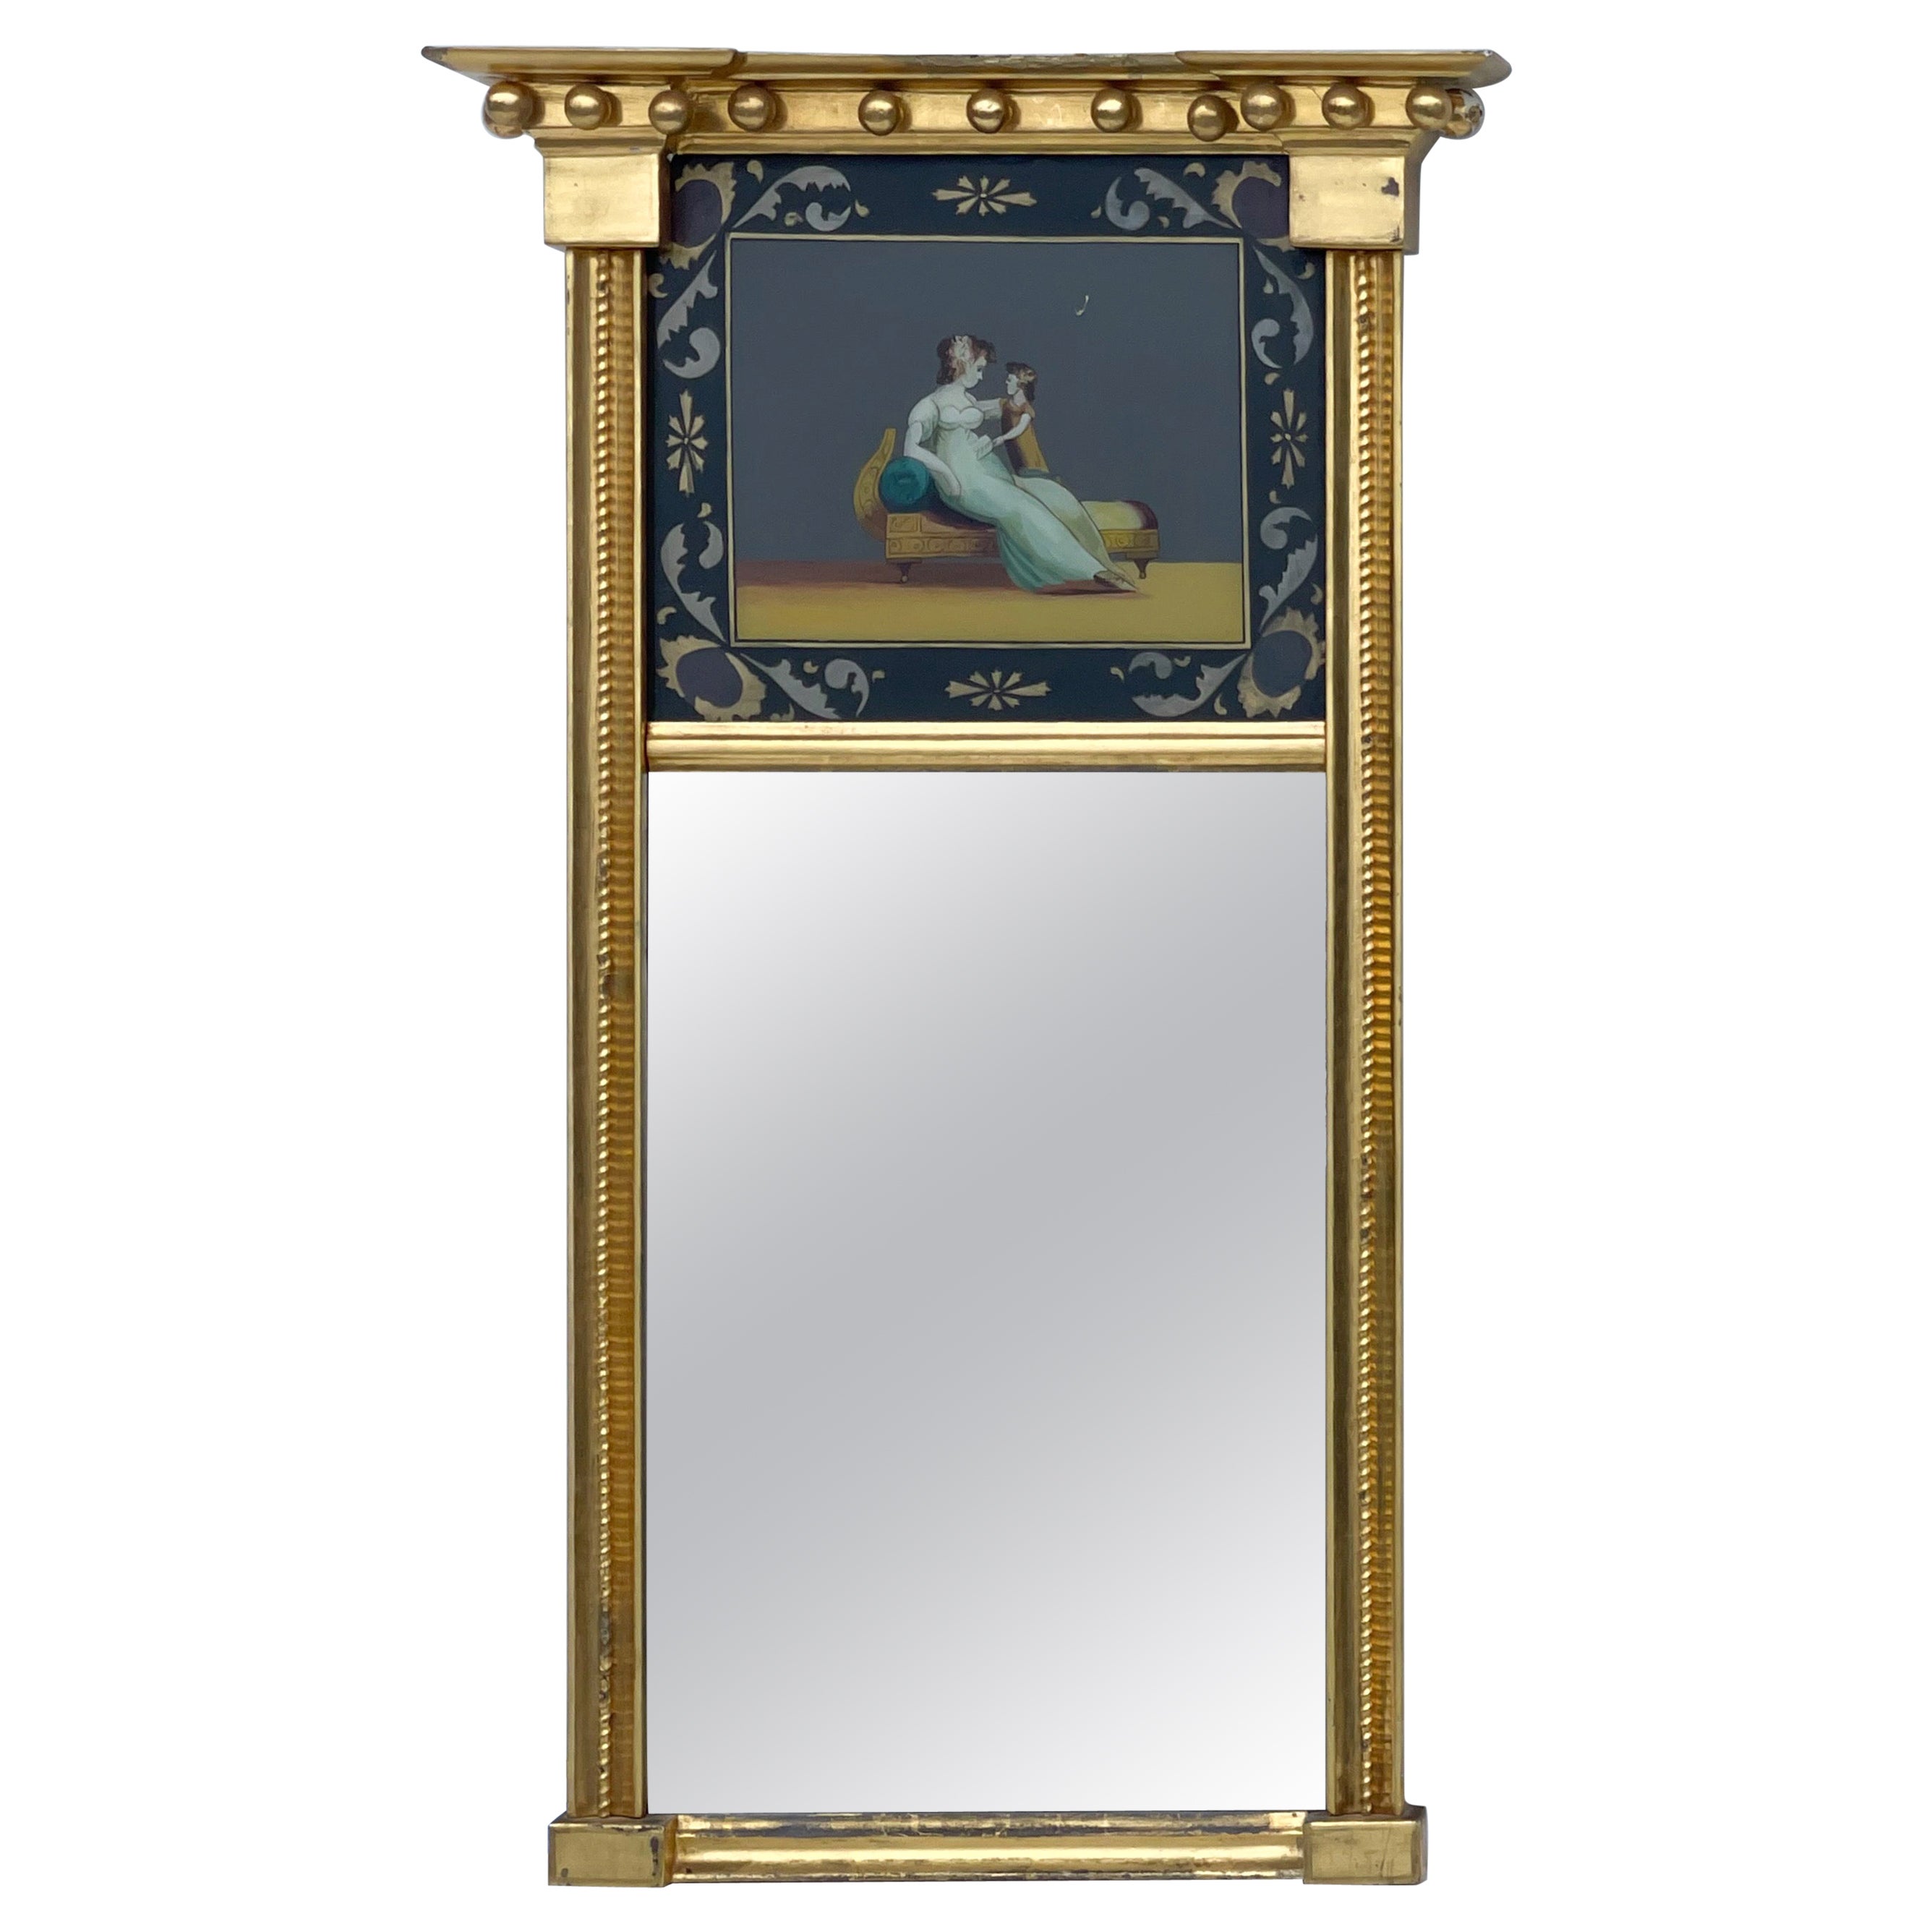 19th Century Federal Style Gilded Eglomise Trumeau Mirror with Mother & Child